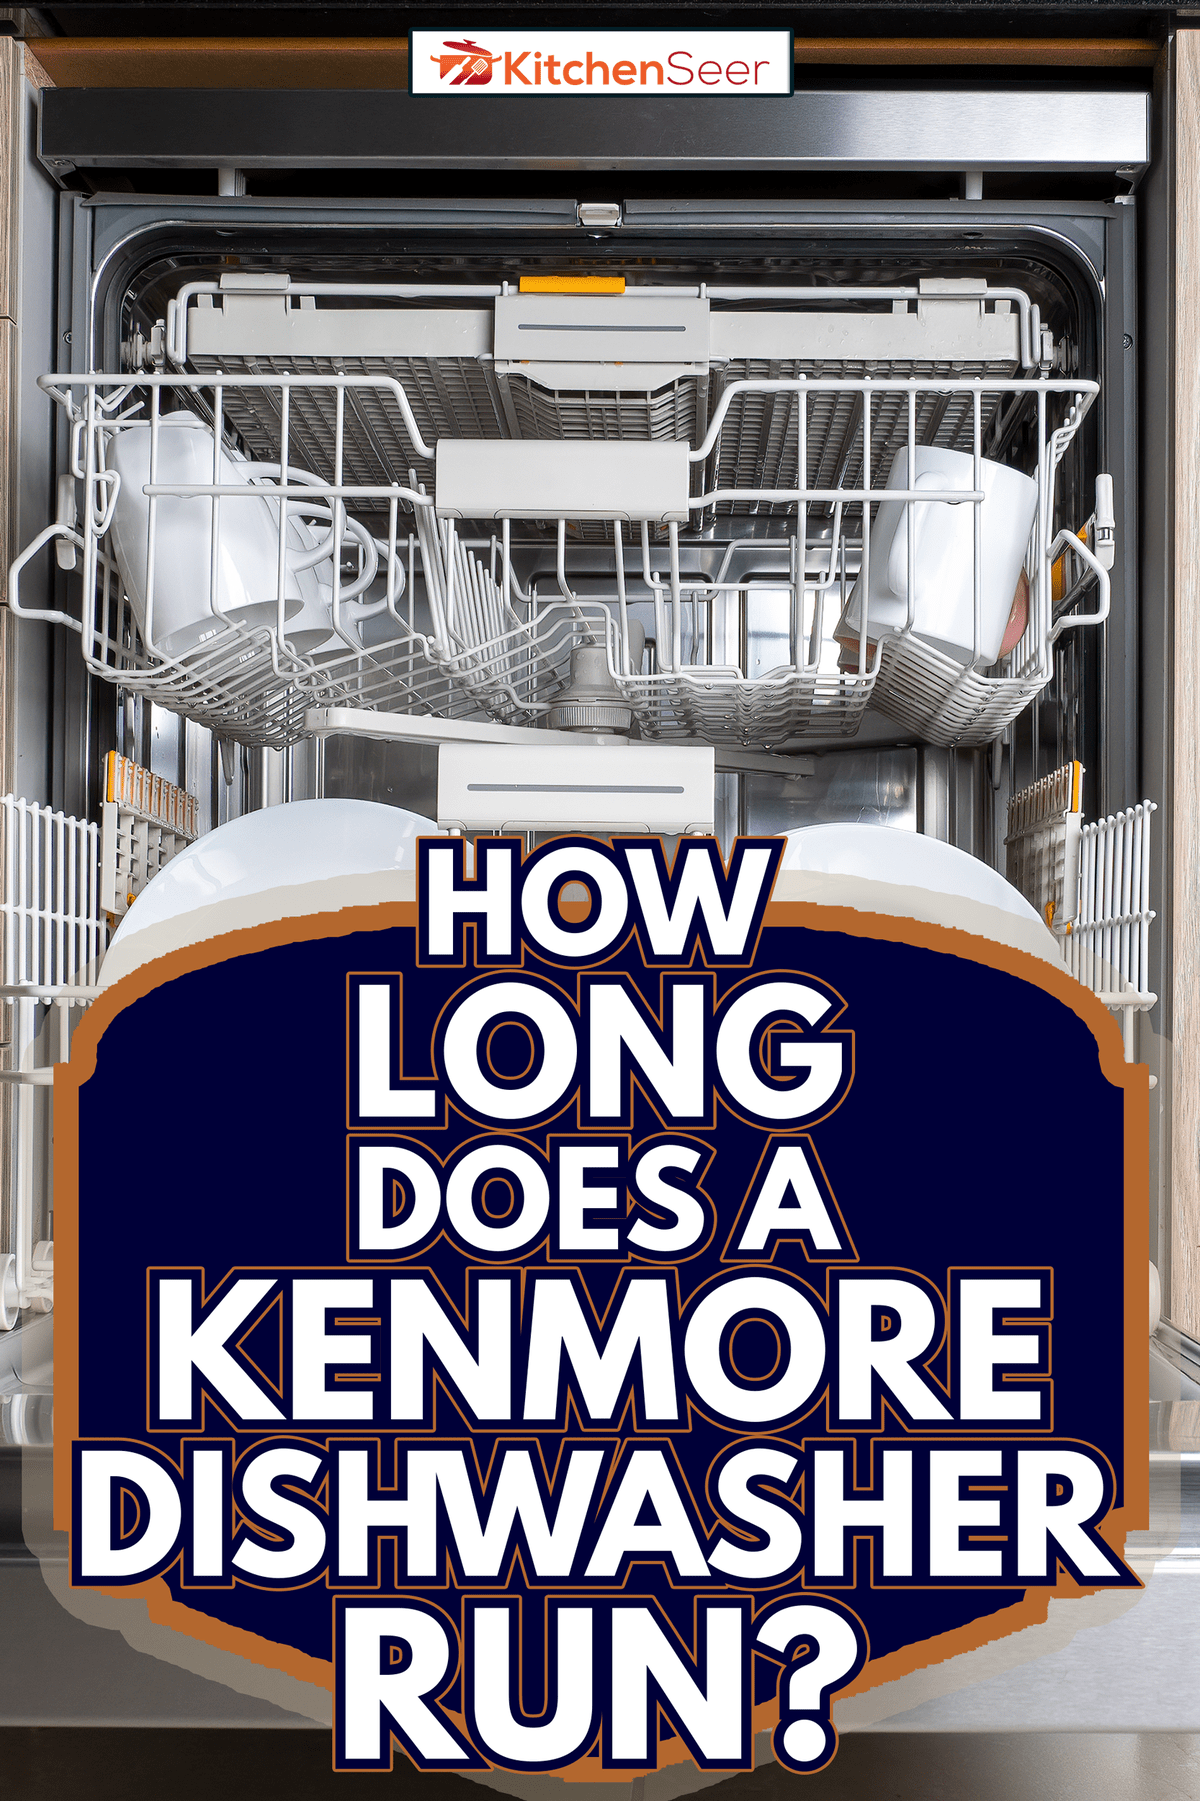 Open door of built-in dishwasher. Kitchen with integrated appliances. Plates and dishes in the dishwasher - How Long Does a Kenmore Dishwasher Run